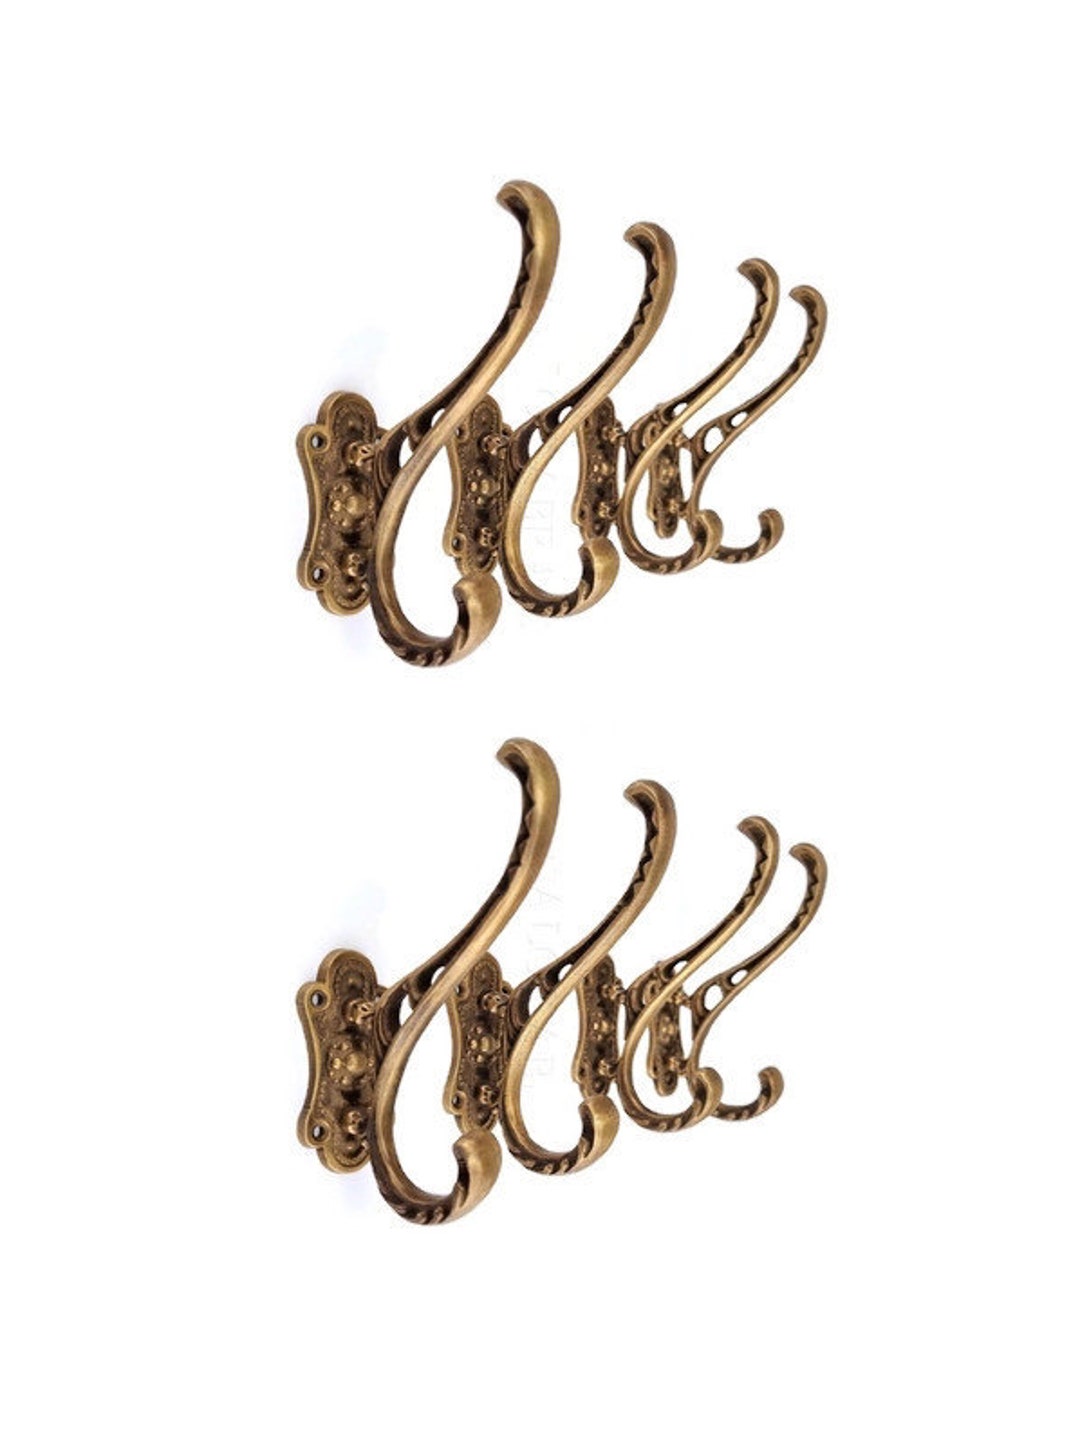 8 Solid Brass Antique Style Coat Hangers Heavy Hooks Old Style 11cm Wall  Mounted Vintage Style Beach Hand Cast Victorian Period 4.1/4 Inch -   Ireland